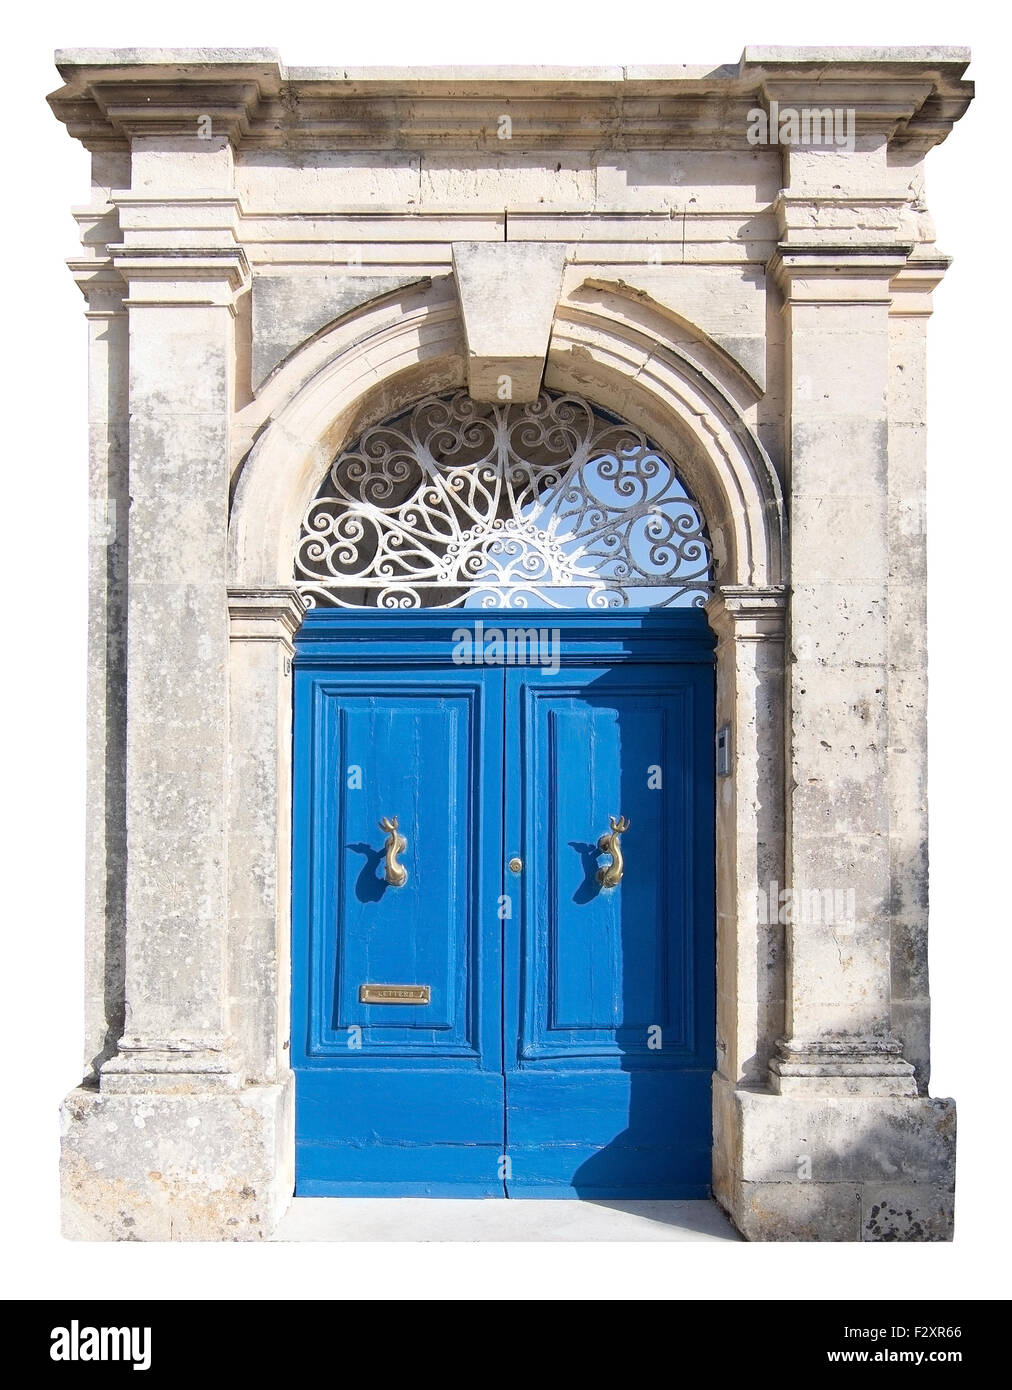 Blue door with white iron lace. Painted doors of Malta series. Stock Photo